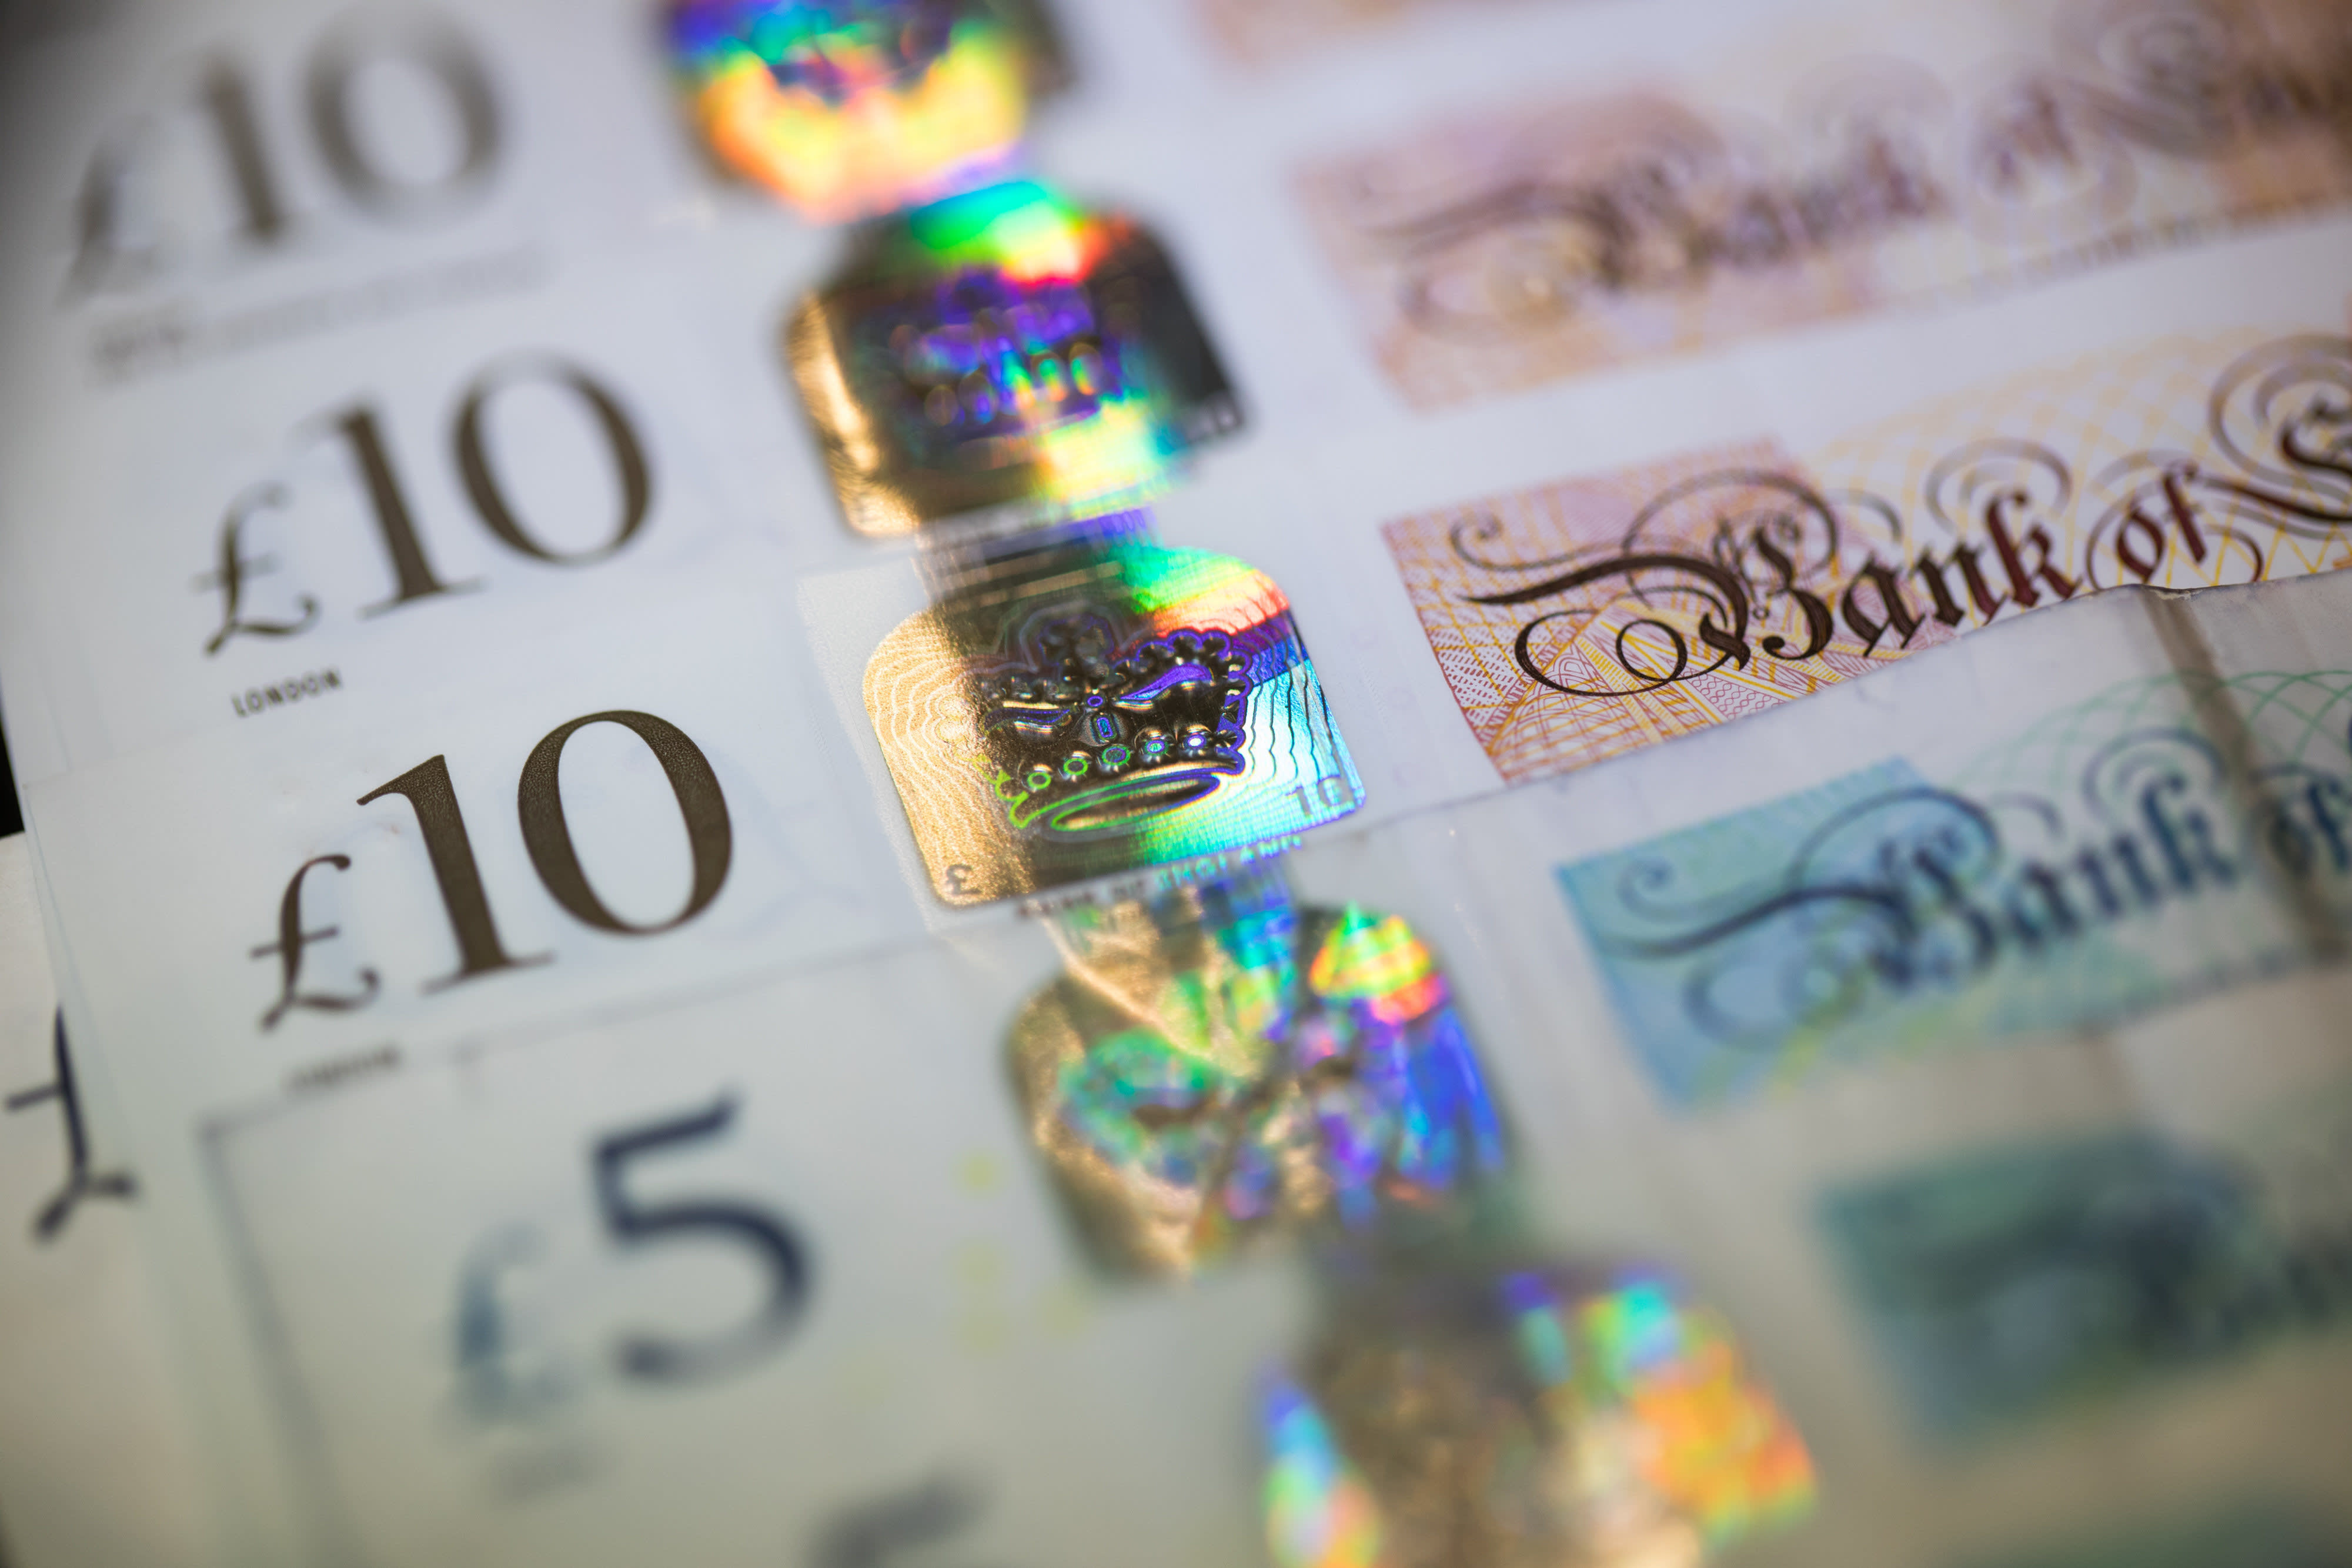 Building society saves £61m from fraud in 2020